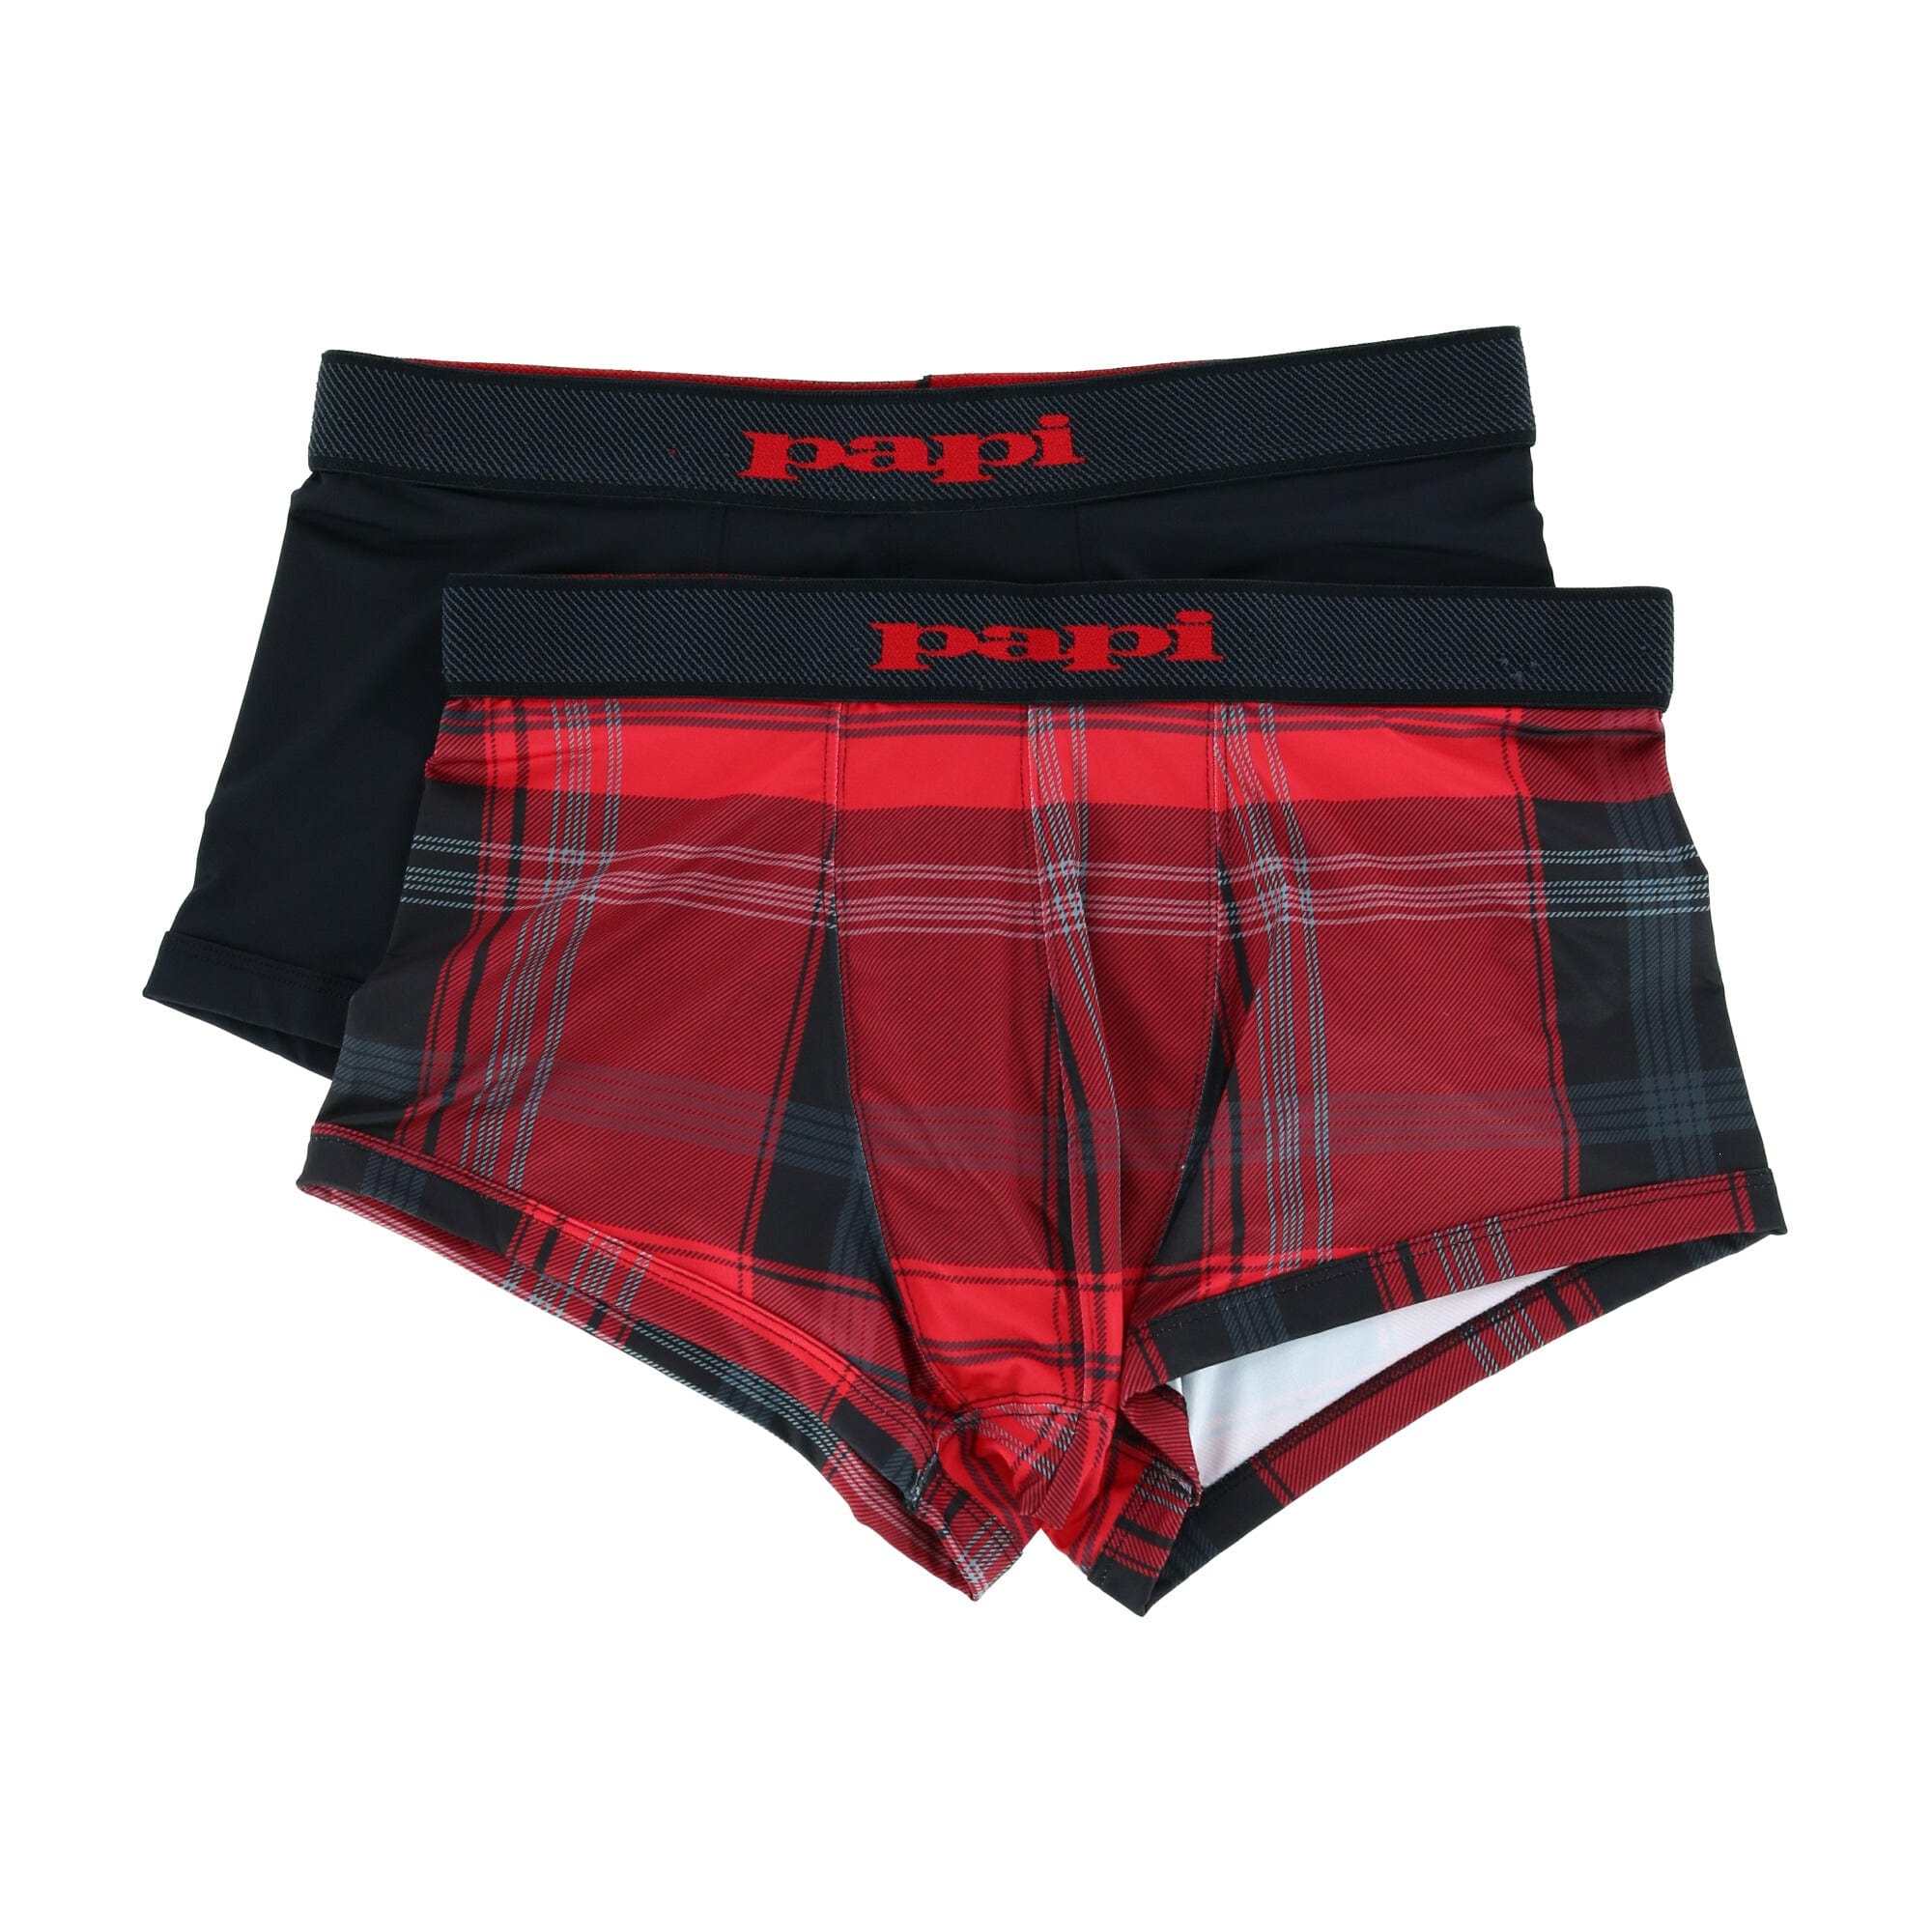 Men's Brazilian Cut Plaid and Solid Underwear Trunks (2 Pack) by Papi